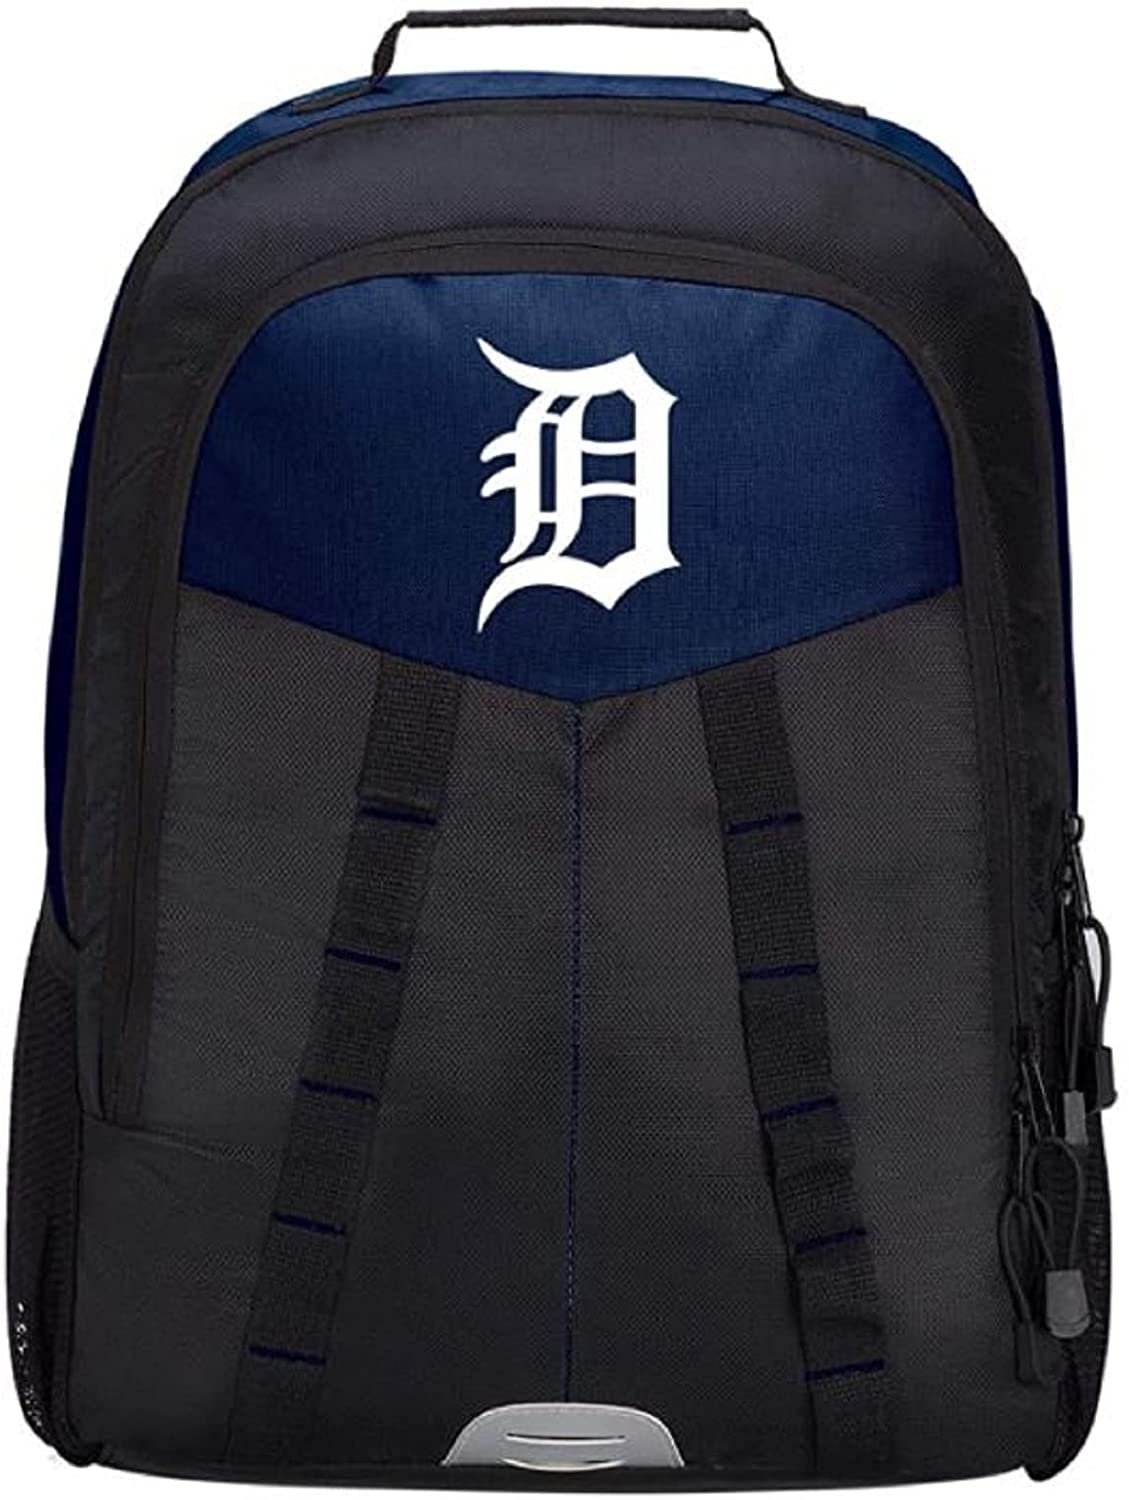 Detroit Tigers Backpack Premium Embroidered Heavy Duty Scorcher Design, 18.5x12.5x5 Inch